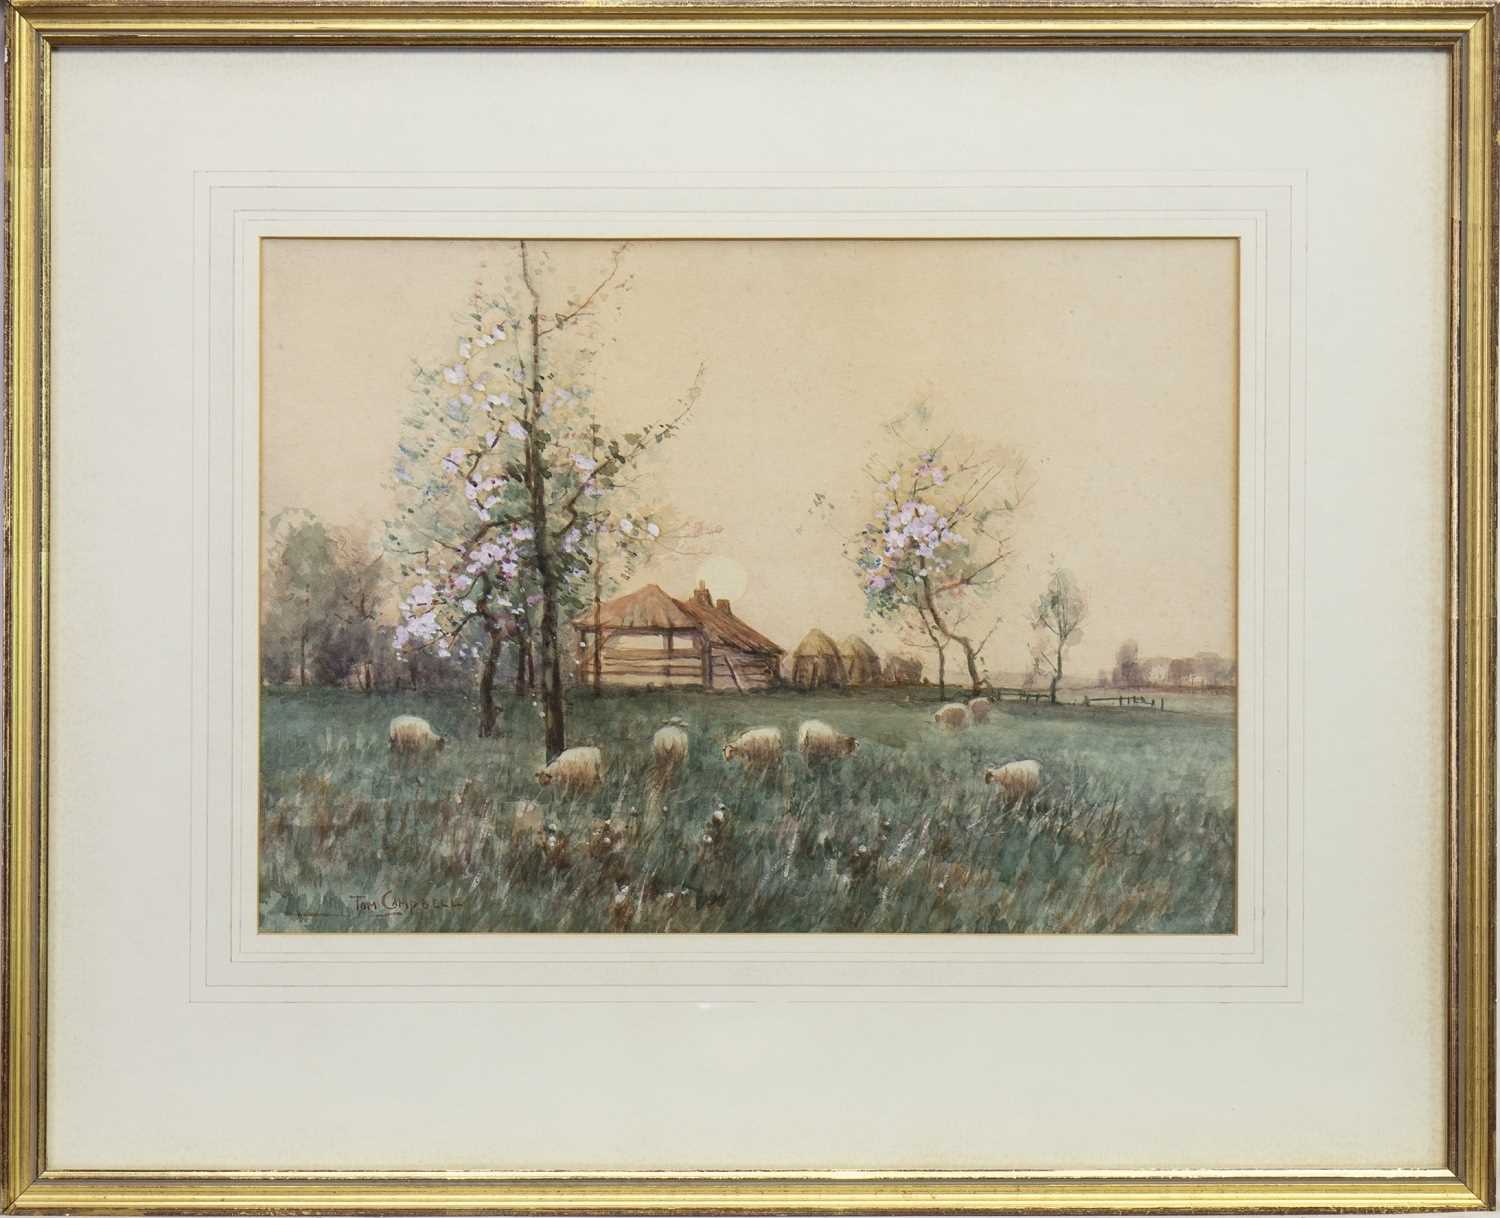 Lot 403 - SHEEP GRAZING, A WATERCOLOUR BY TOM CAMPBELL